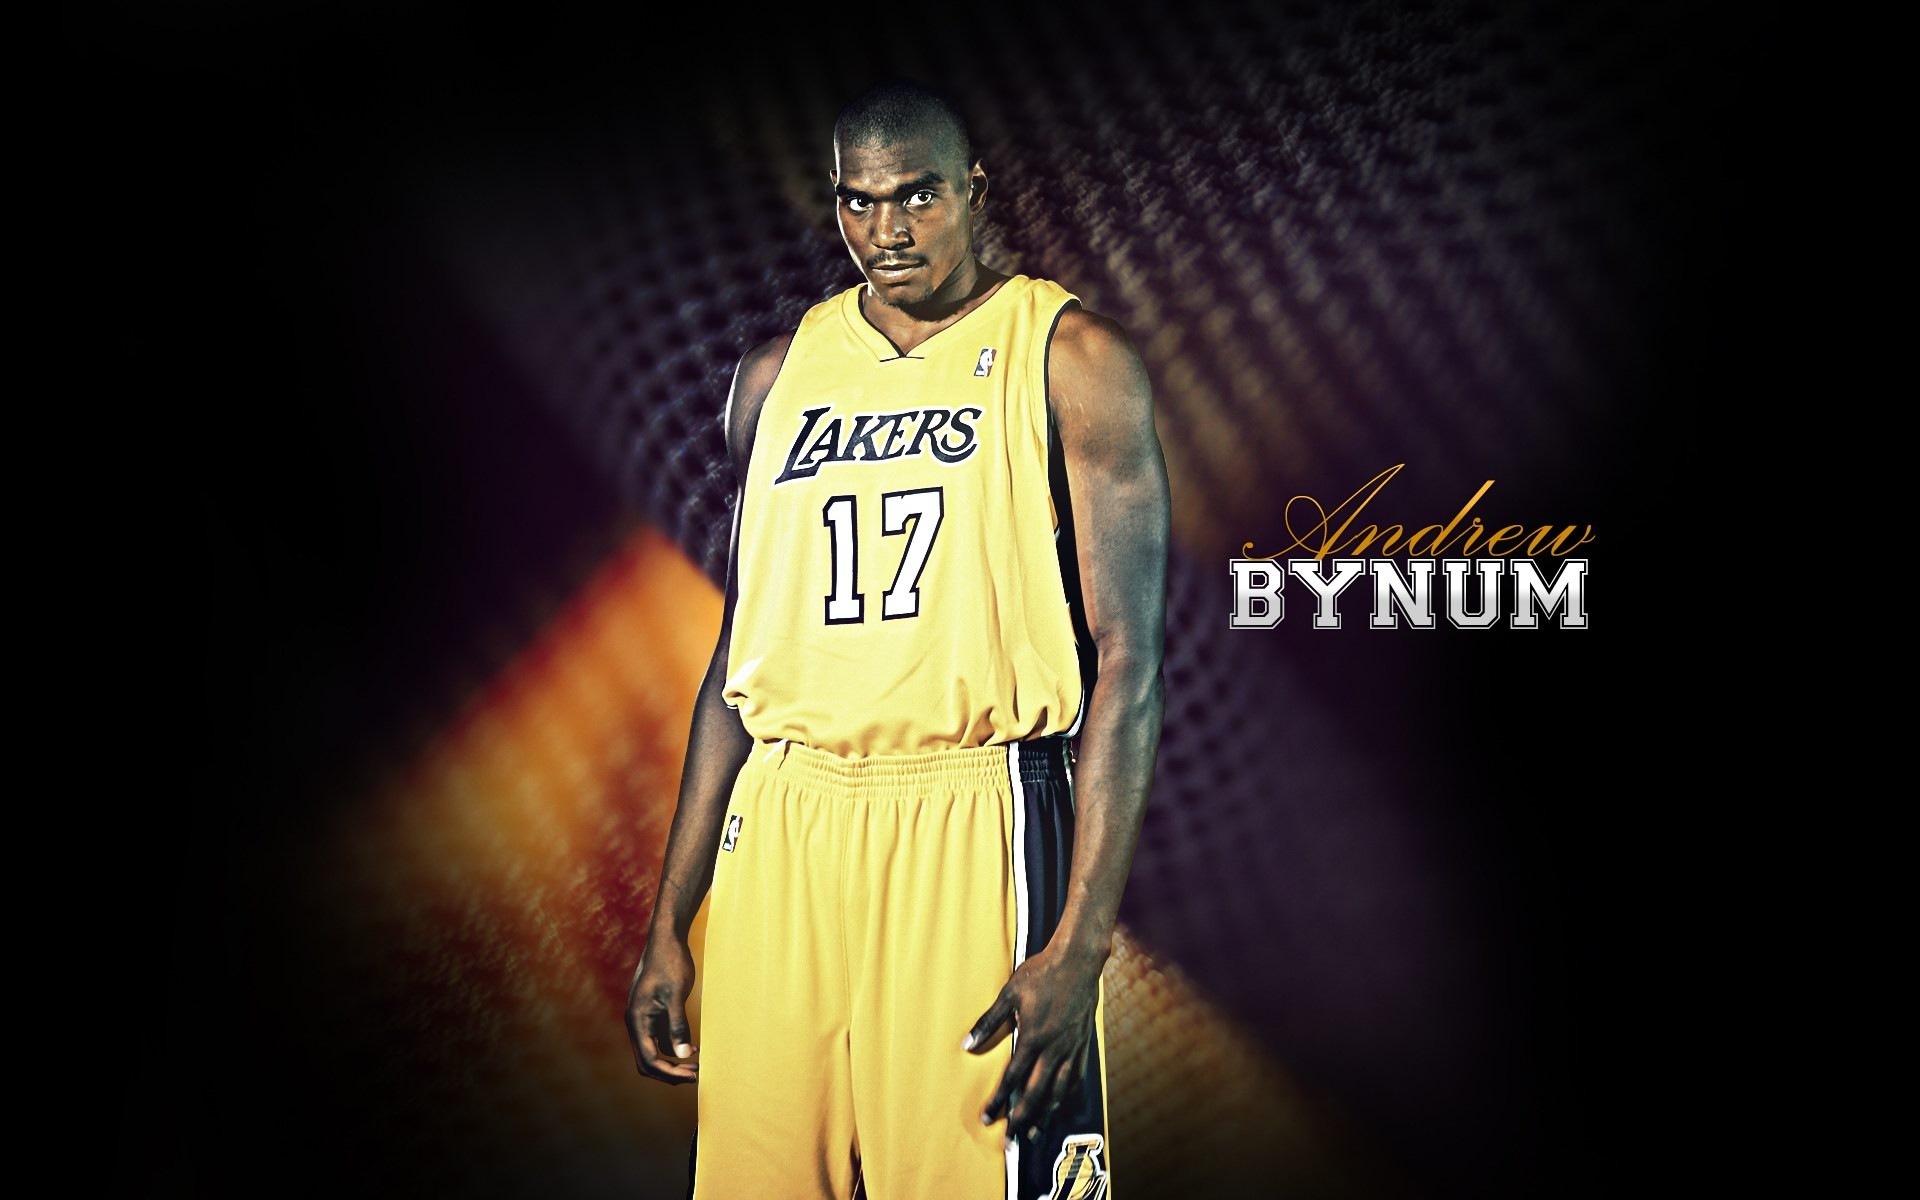 Los Angeles Lakers Official Wallpaper #2 - 1920x1200